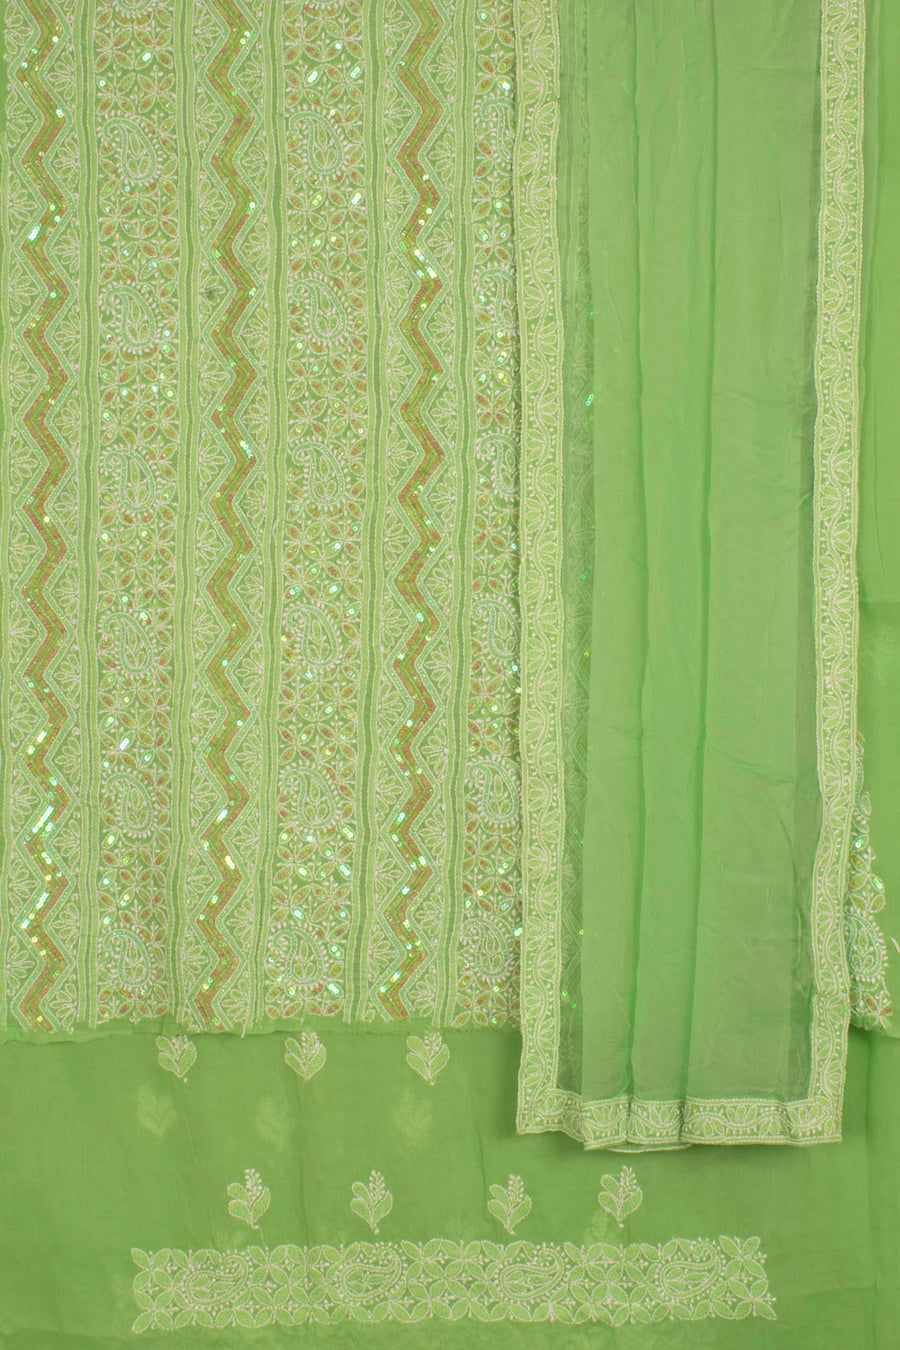 Hand Embroidered Chikankari Cotton 3-Piece Salwar Suit Material With Tepchi, Sequin, Bead Work and Chiffon Dupatta